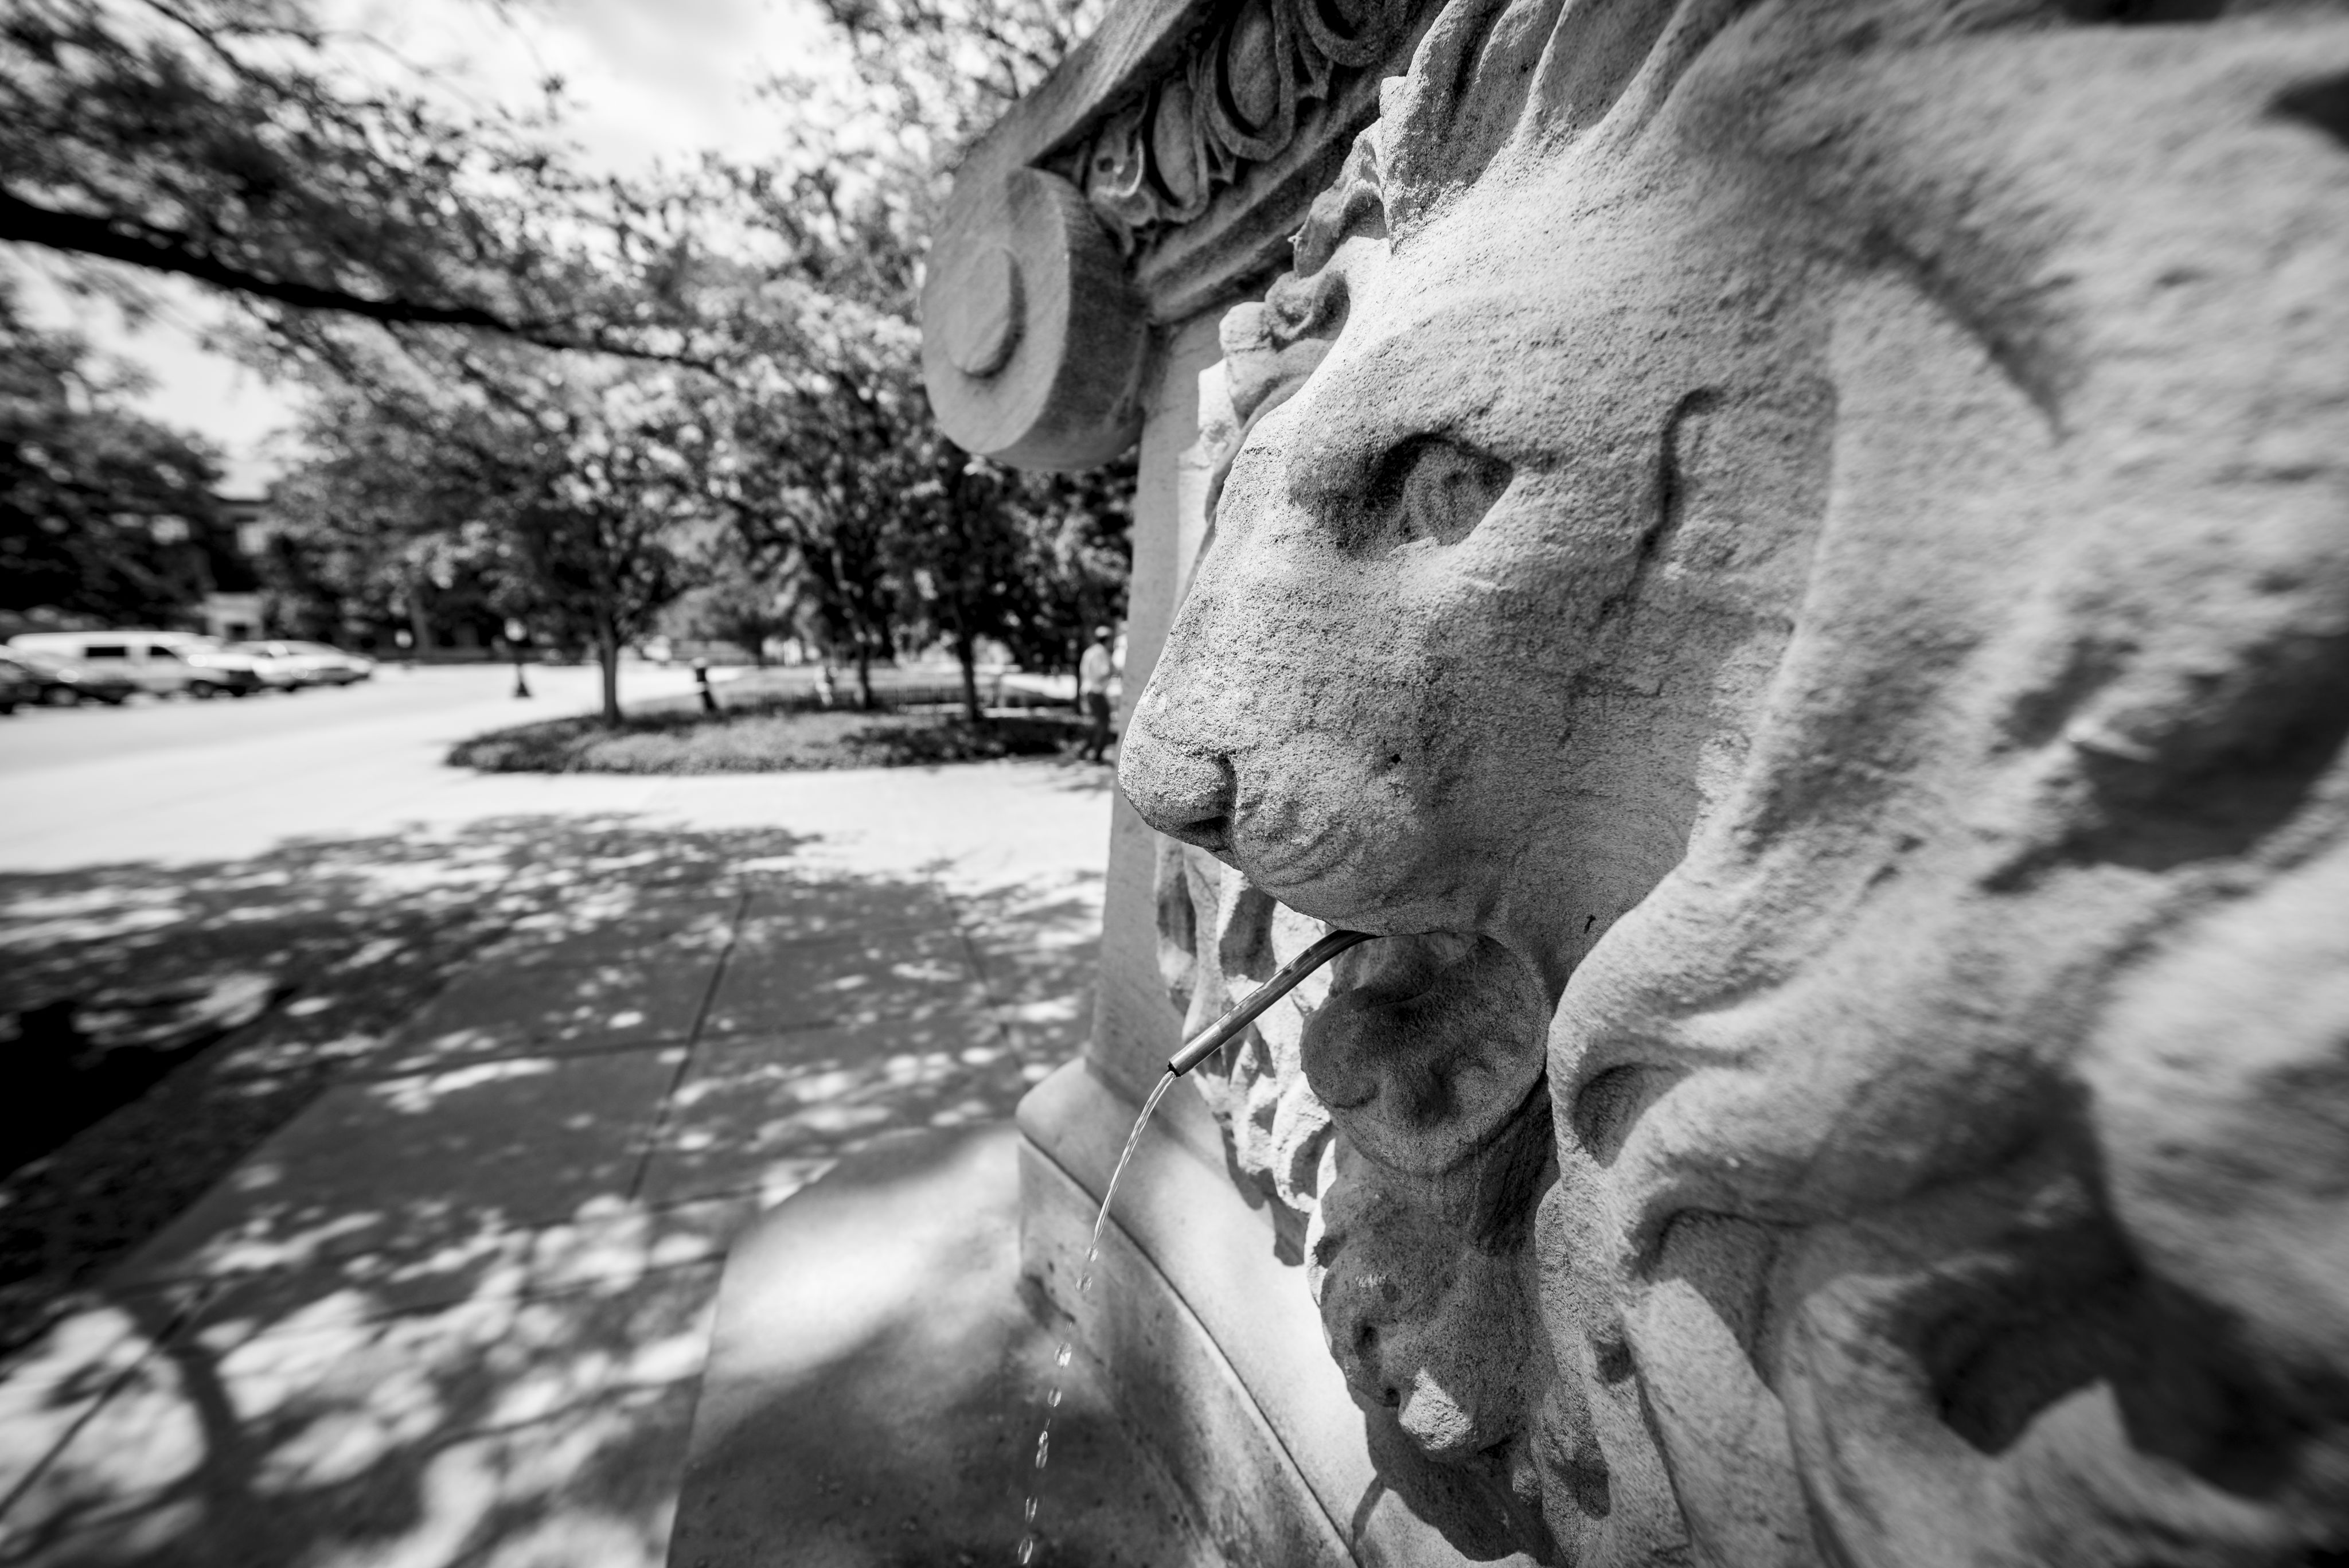 The image shows the Stone Lions Fountain on campus